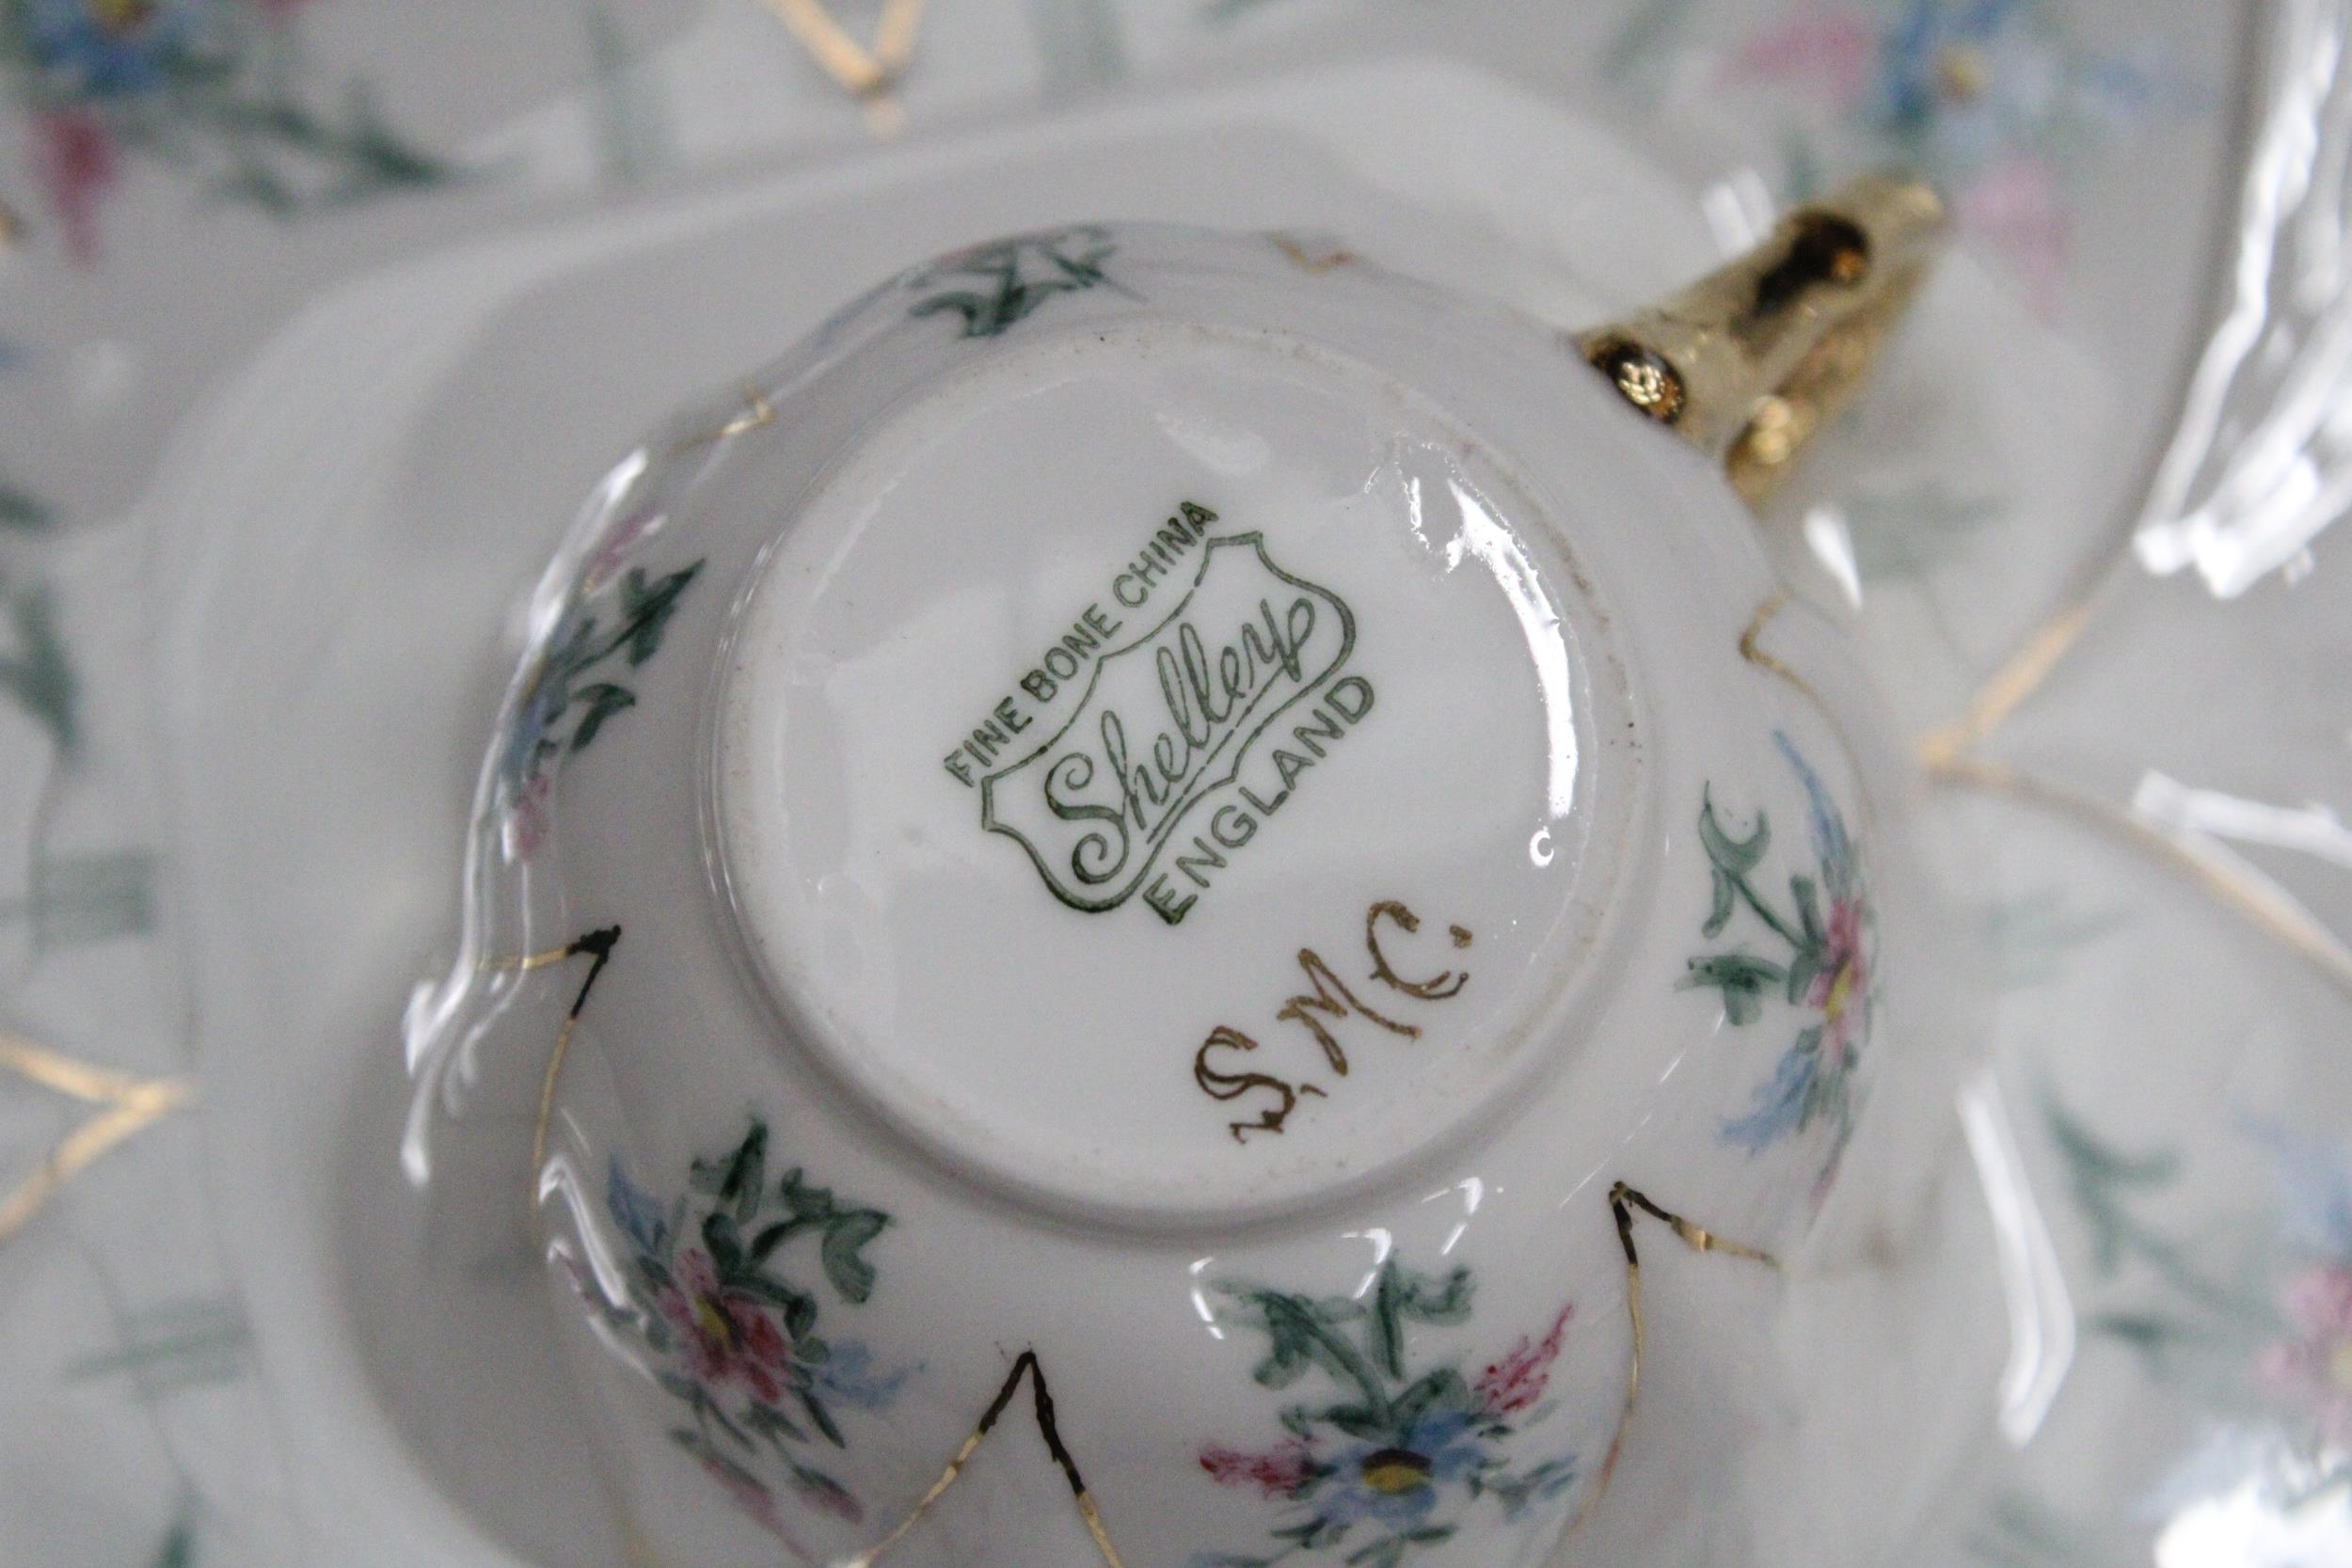 A VINTAGE SHELLEY HANDPAINTED DAINTY SHAPE TEACUPS AND SAUCERS TO INCLUDE SUGAR, CREAMER, CAKE/BREAD - Image 6 of 6